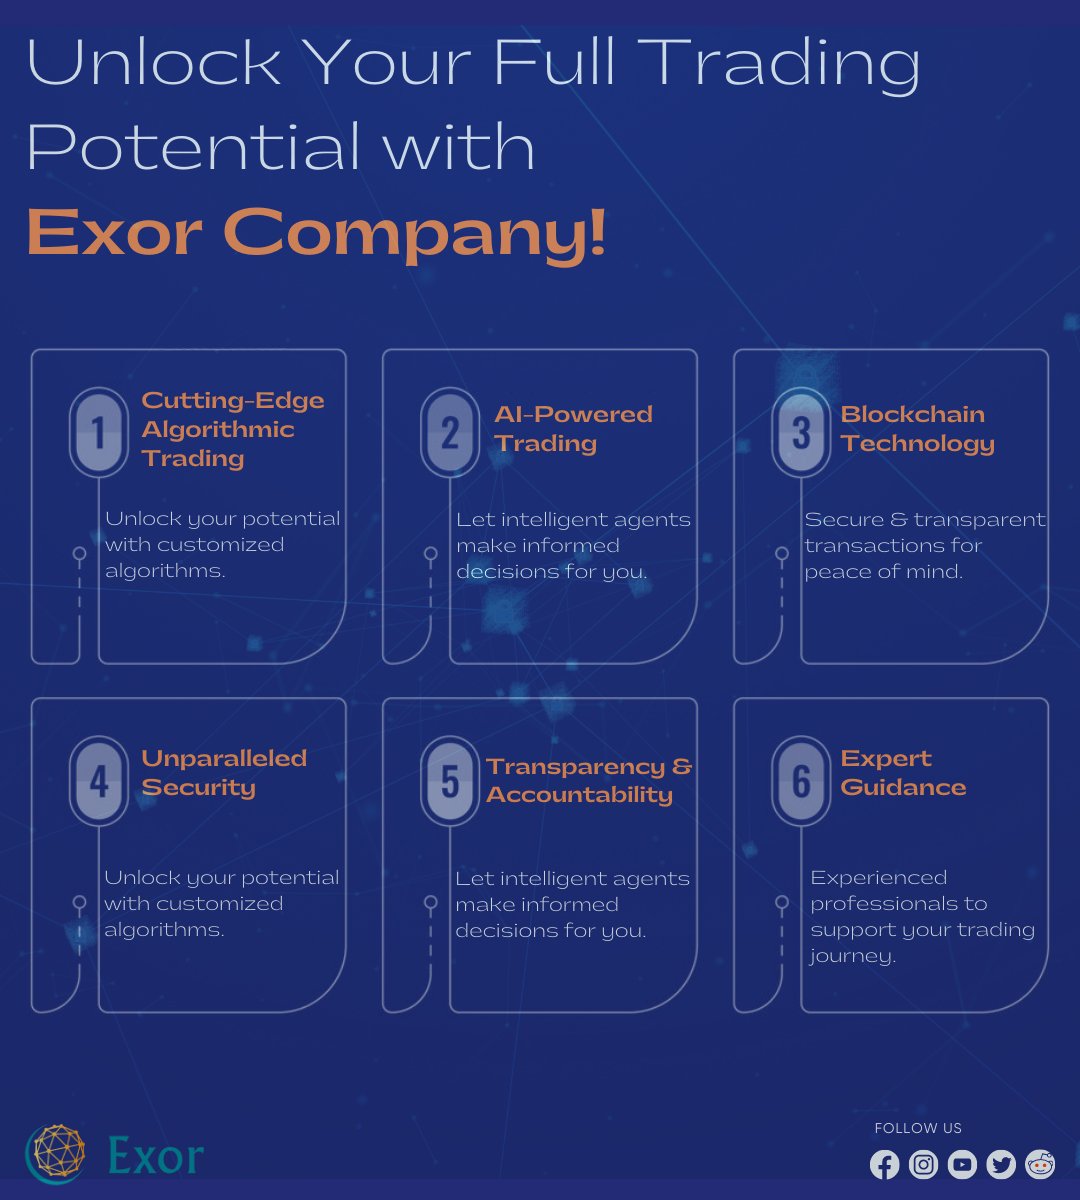 Maximize your trading potential with Exor Company! Gain access to expert guidance, cutting-edge tools, and a wide range of investment opportunities. Unlock the door to success and achieve your trading goals with us. 

#TradingPotential #ExorCompany #SuccessInTheMaking